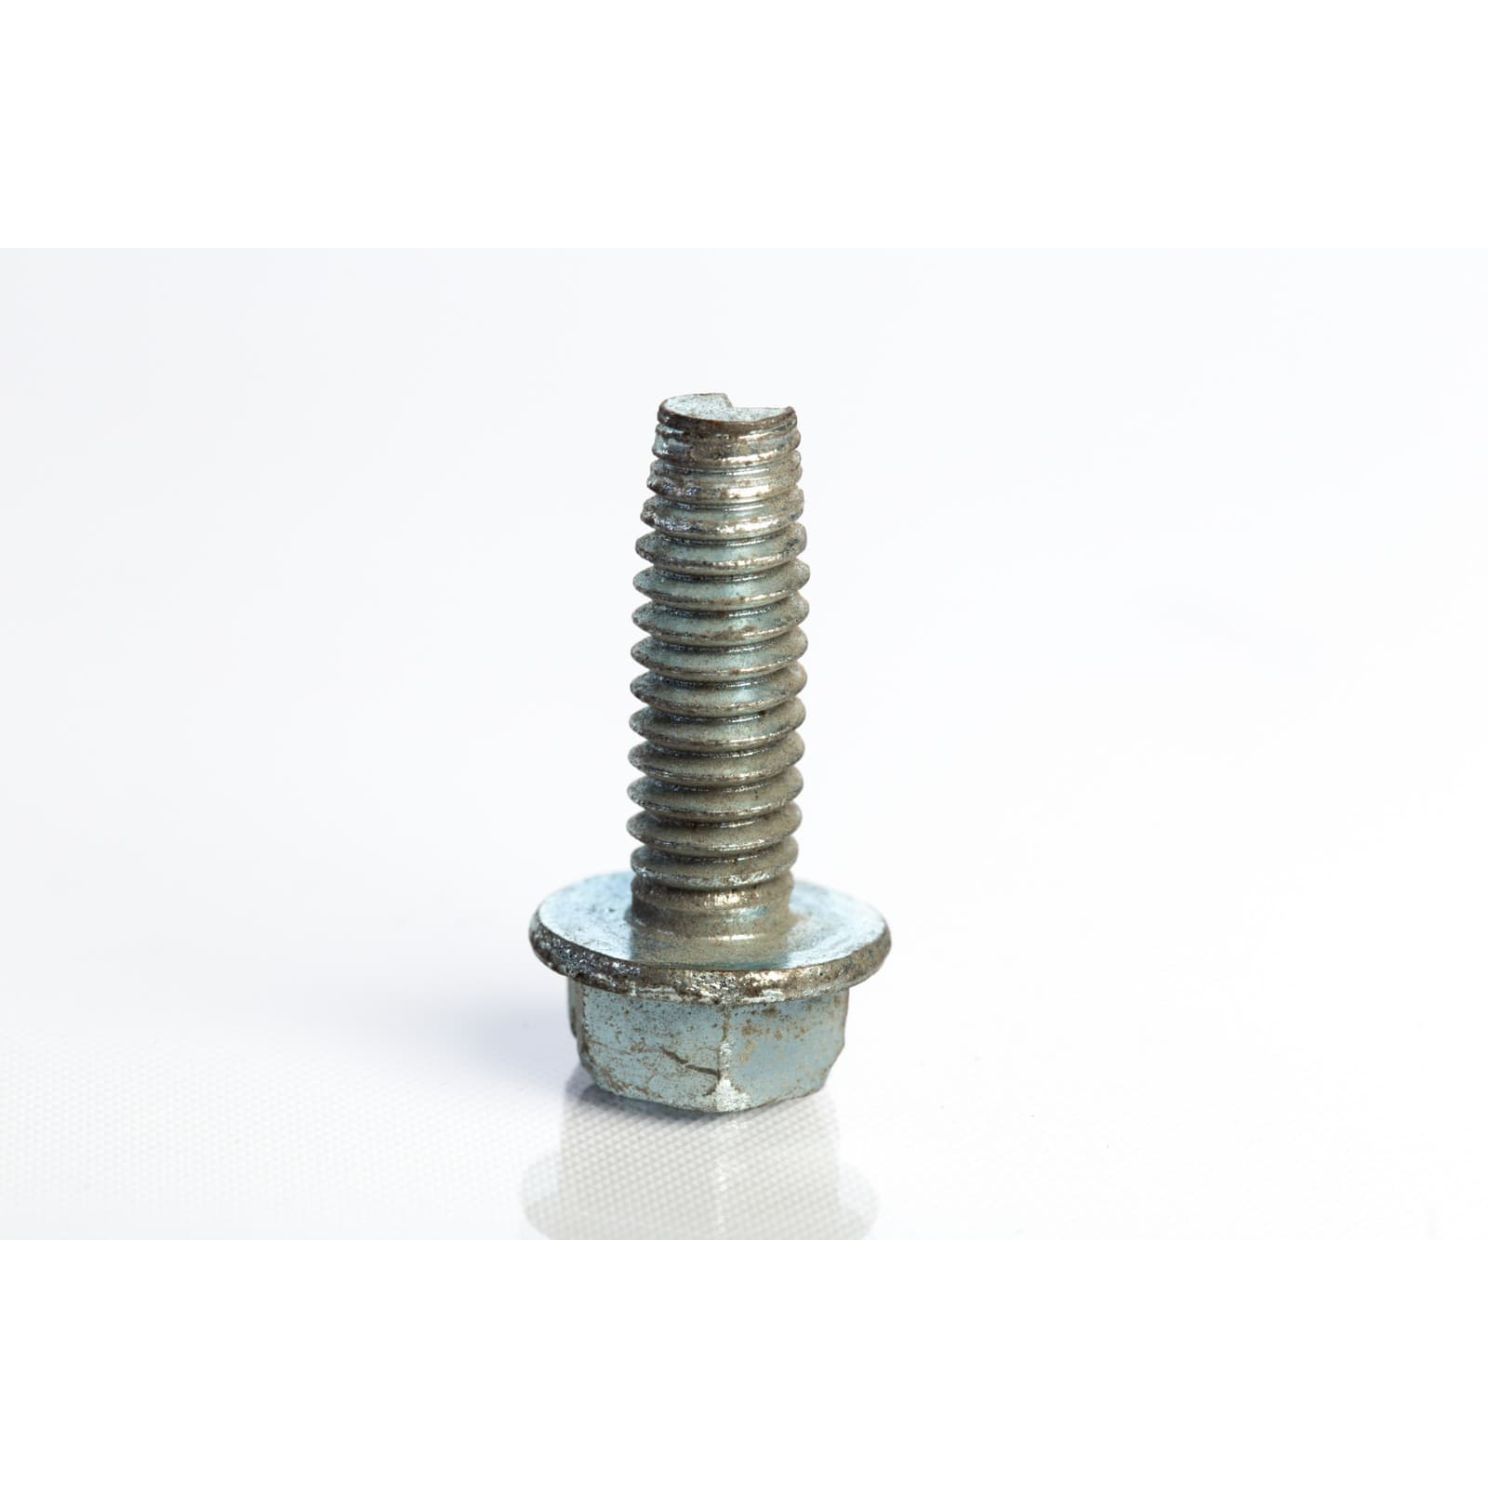 G10570 1/4 x 3/4 Self Tapping Screw fits Kinze